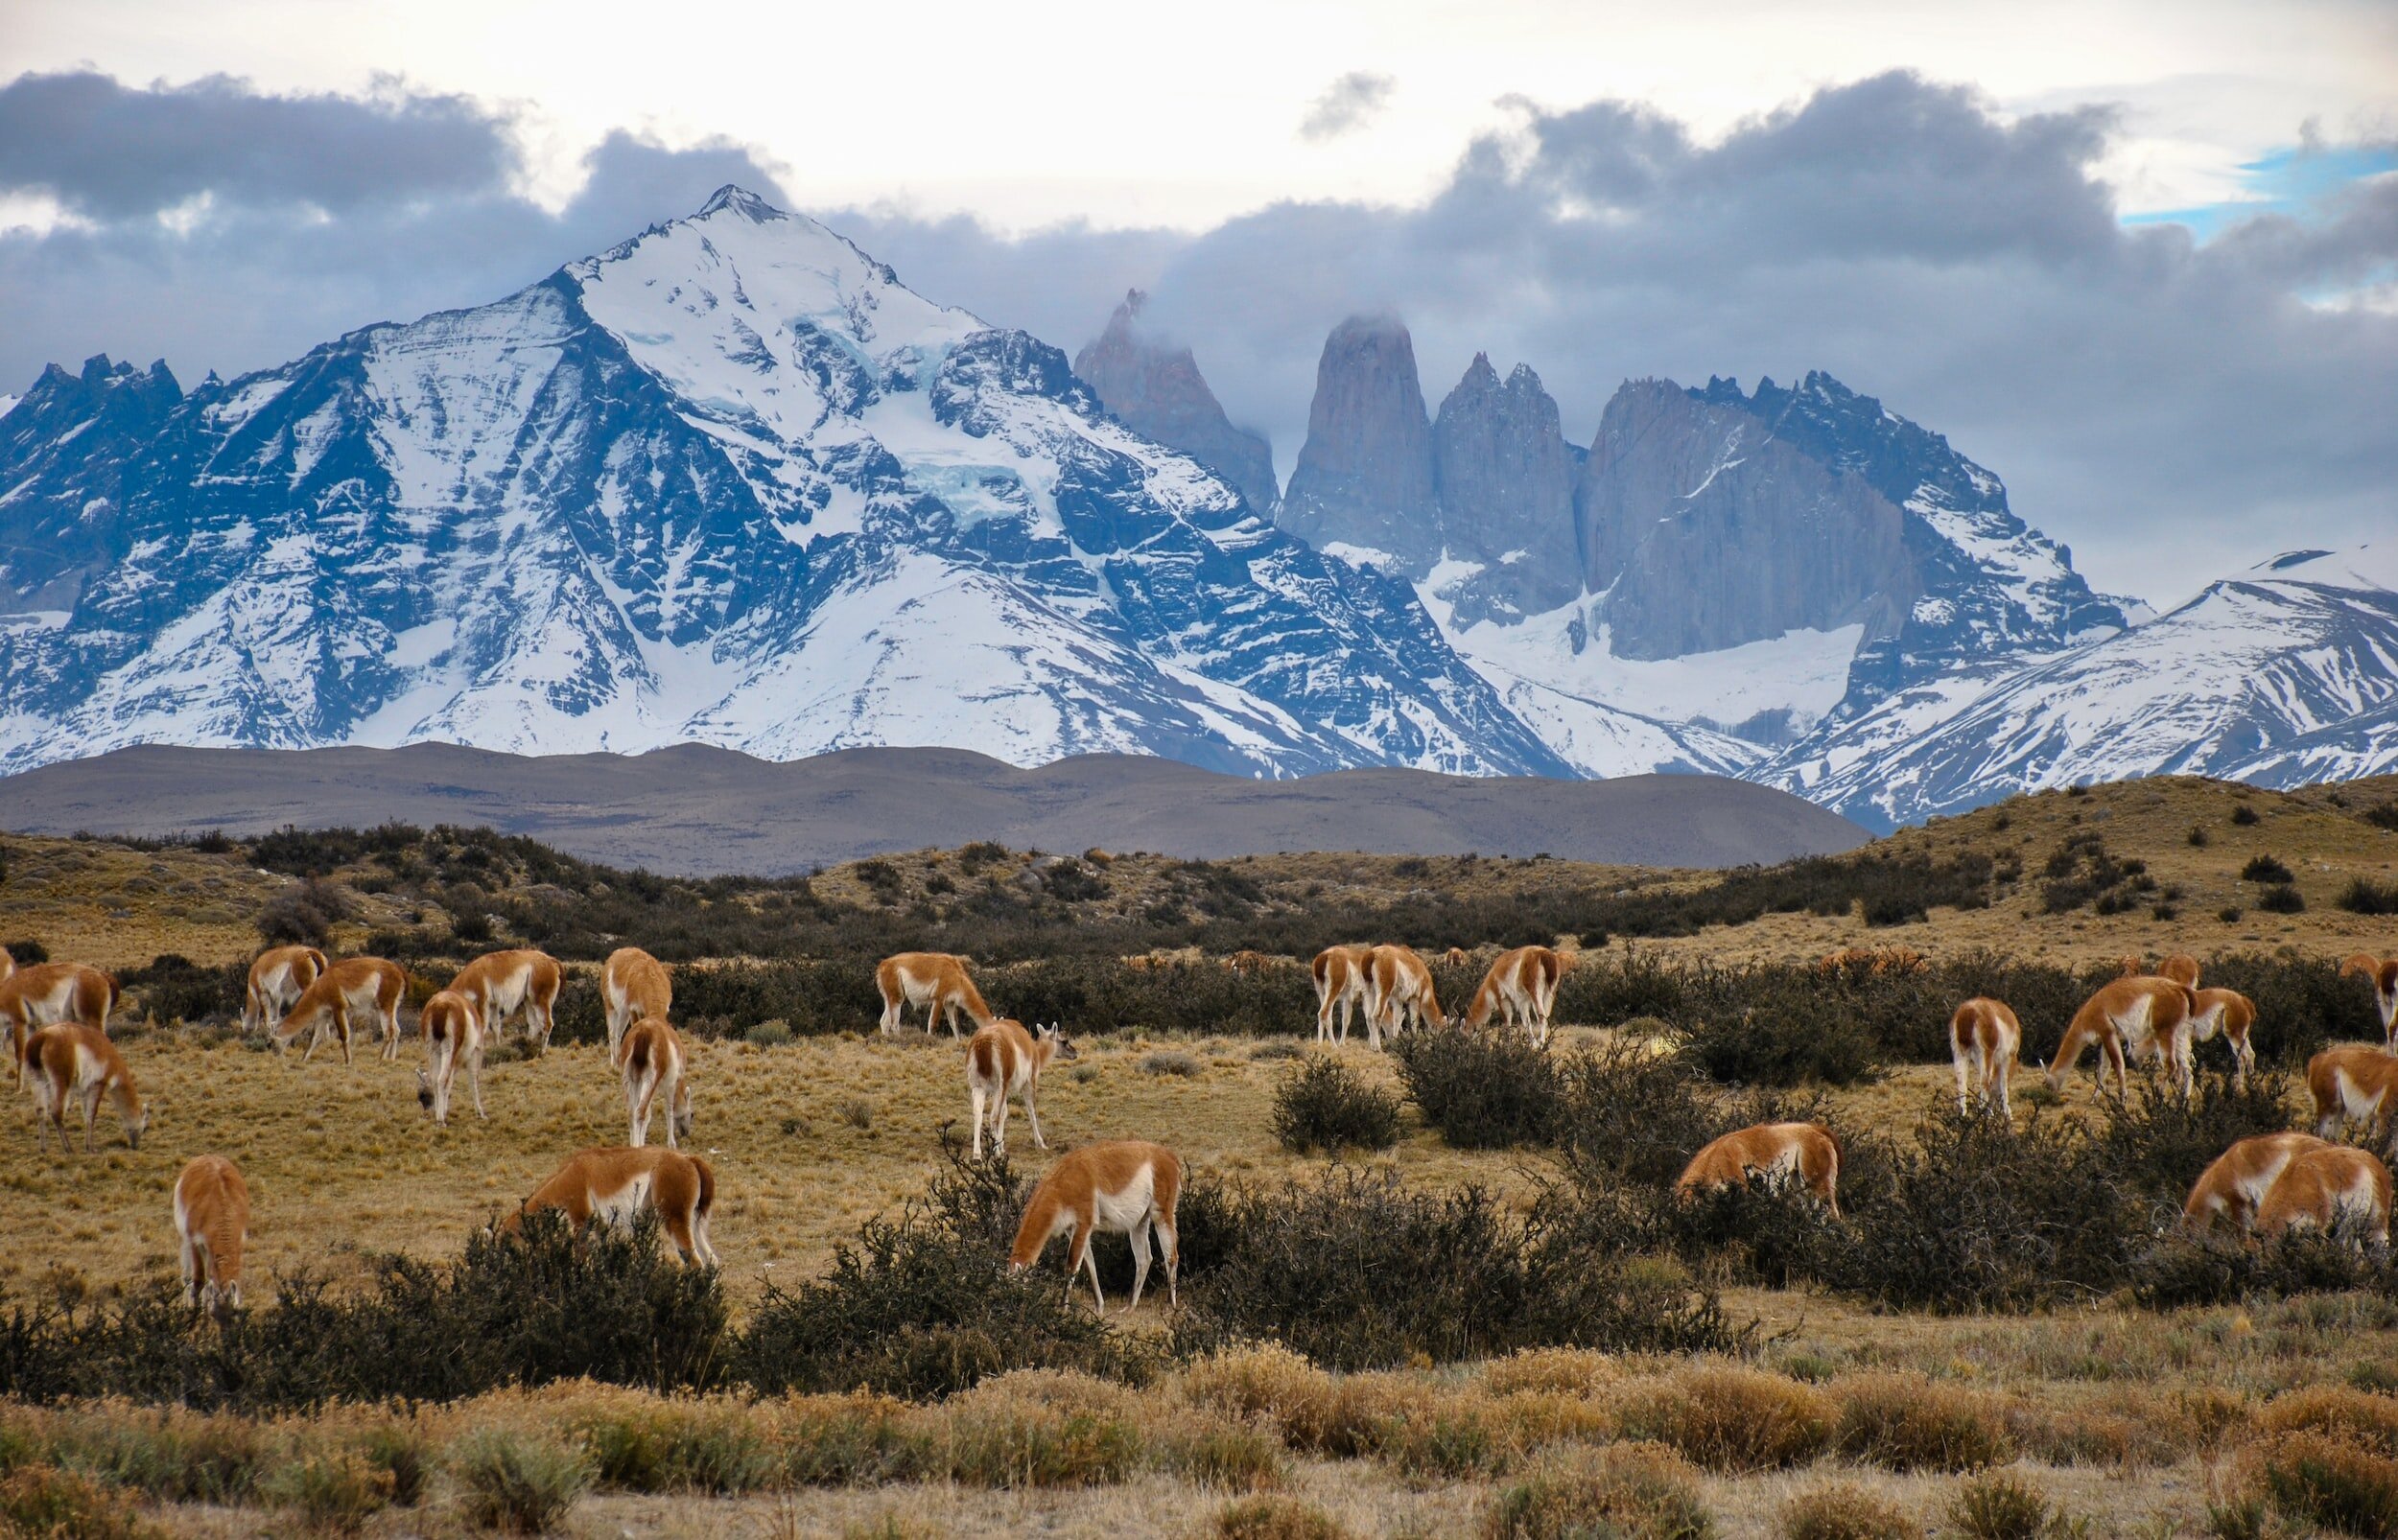 Guanacos grazing on a plain beneath snowcapped mountains in Torres del Paine park.